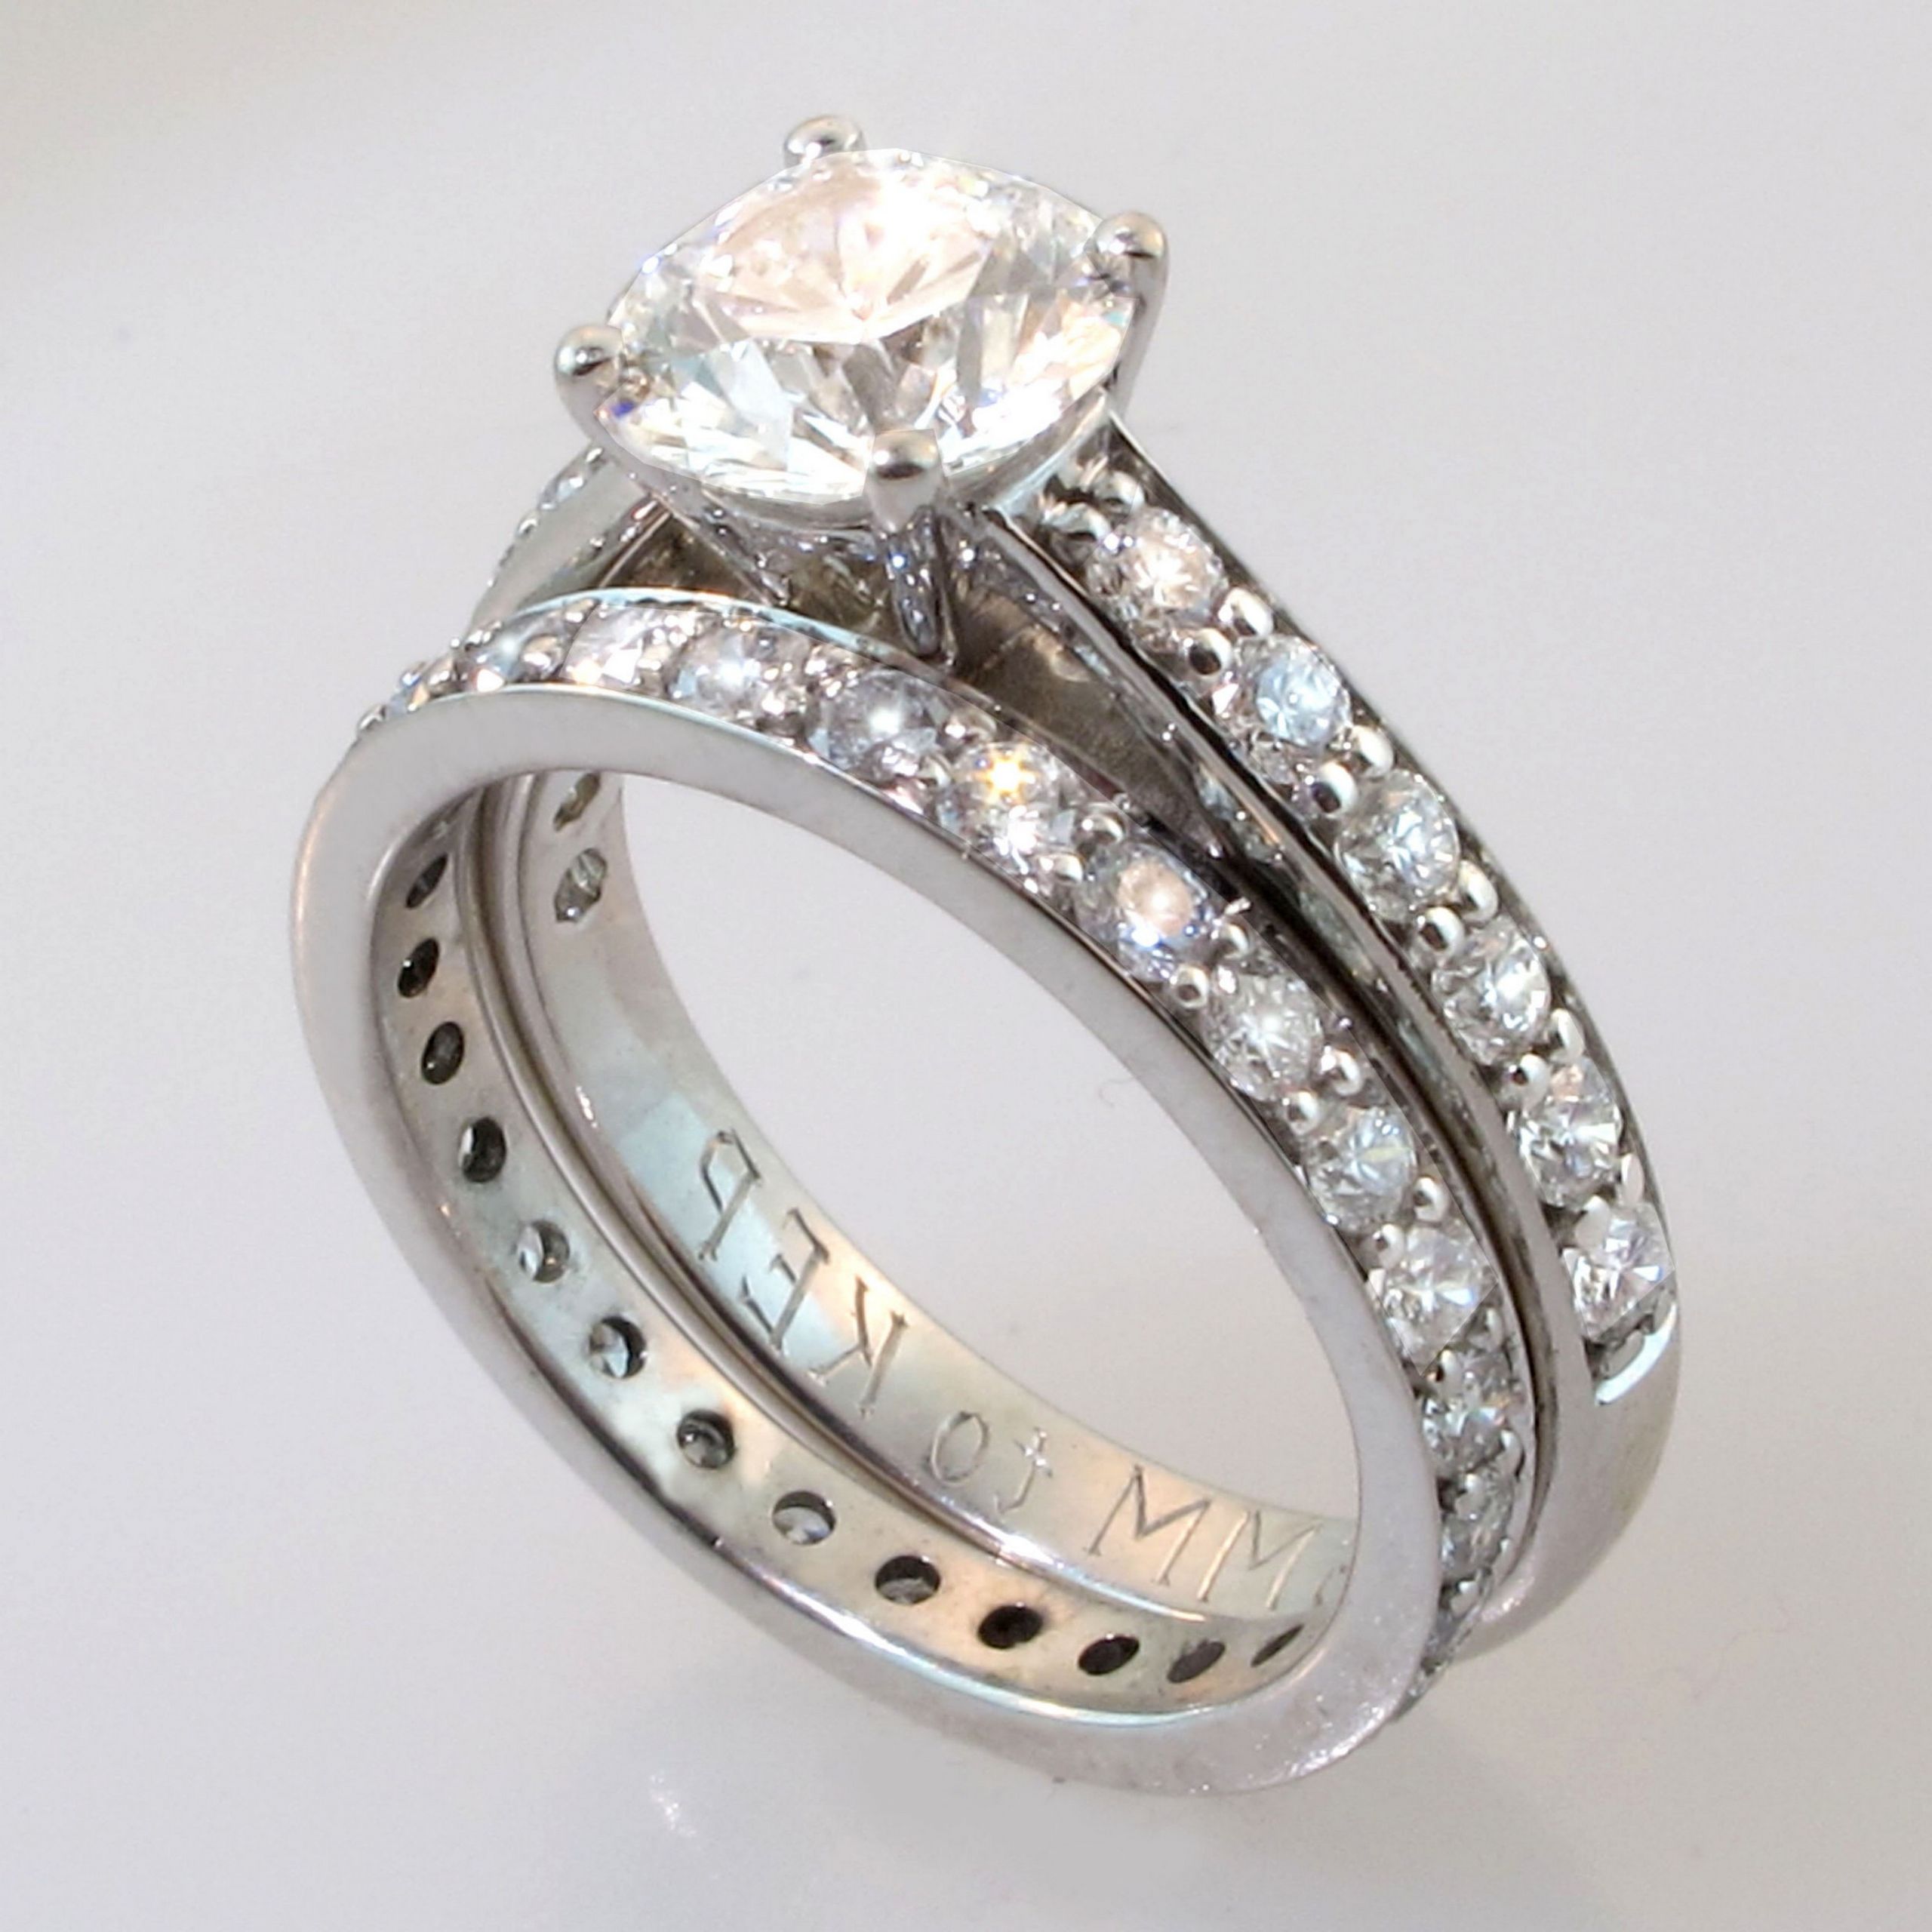 Wedding Band Sets Cheap
 Why Should Make Wedding Ring Sets For Women and Also Men